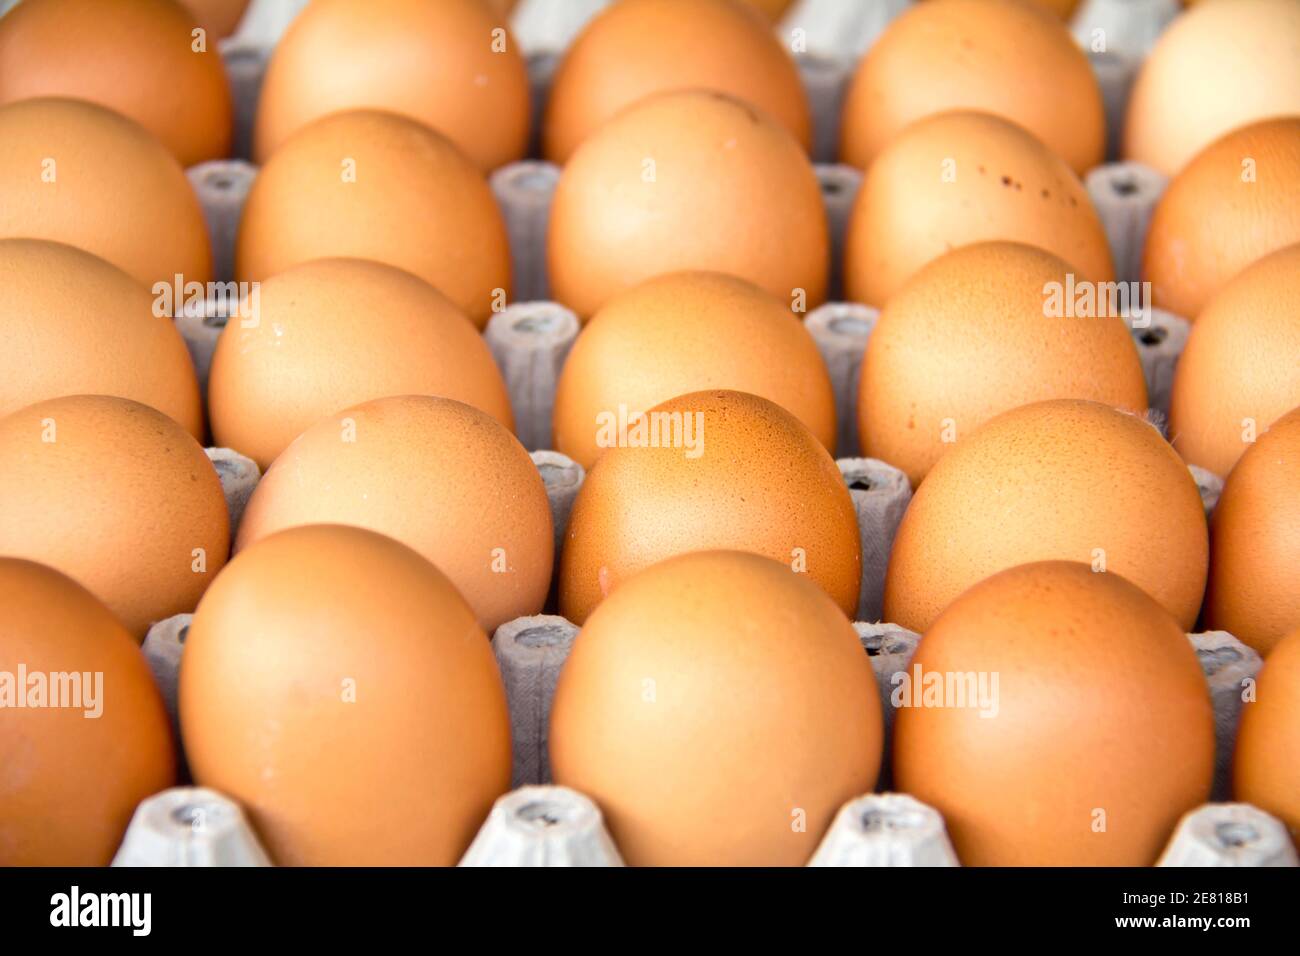 Eggs in the box. Stock Photo